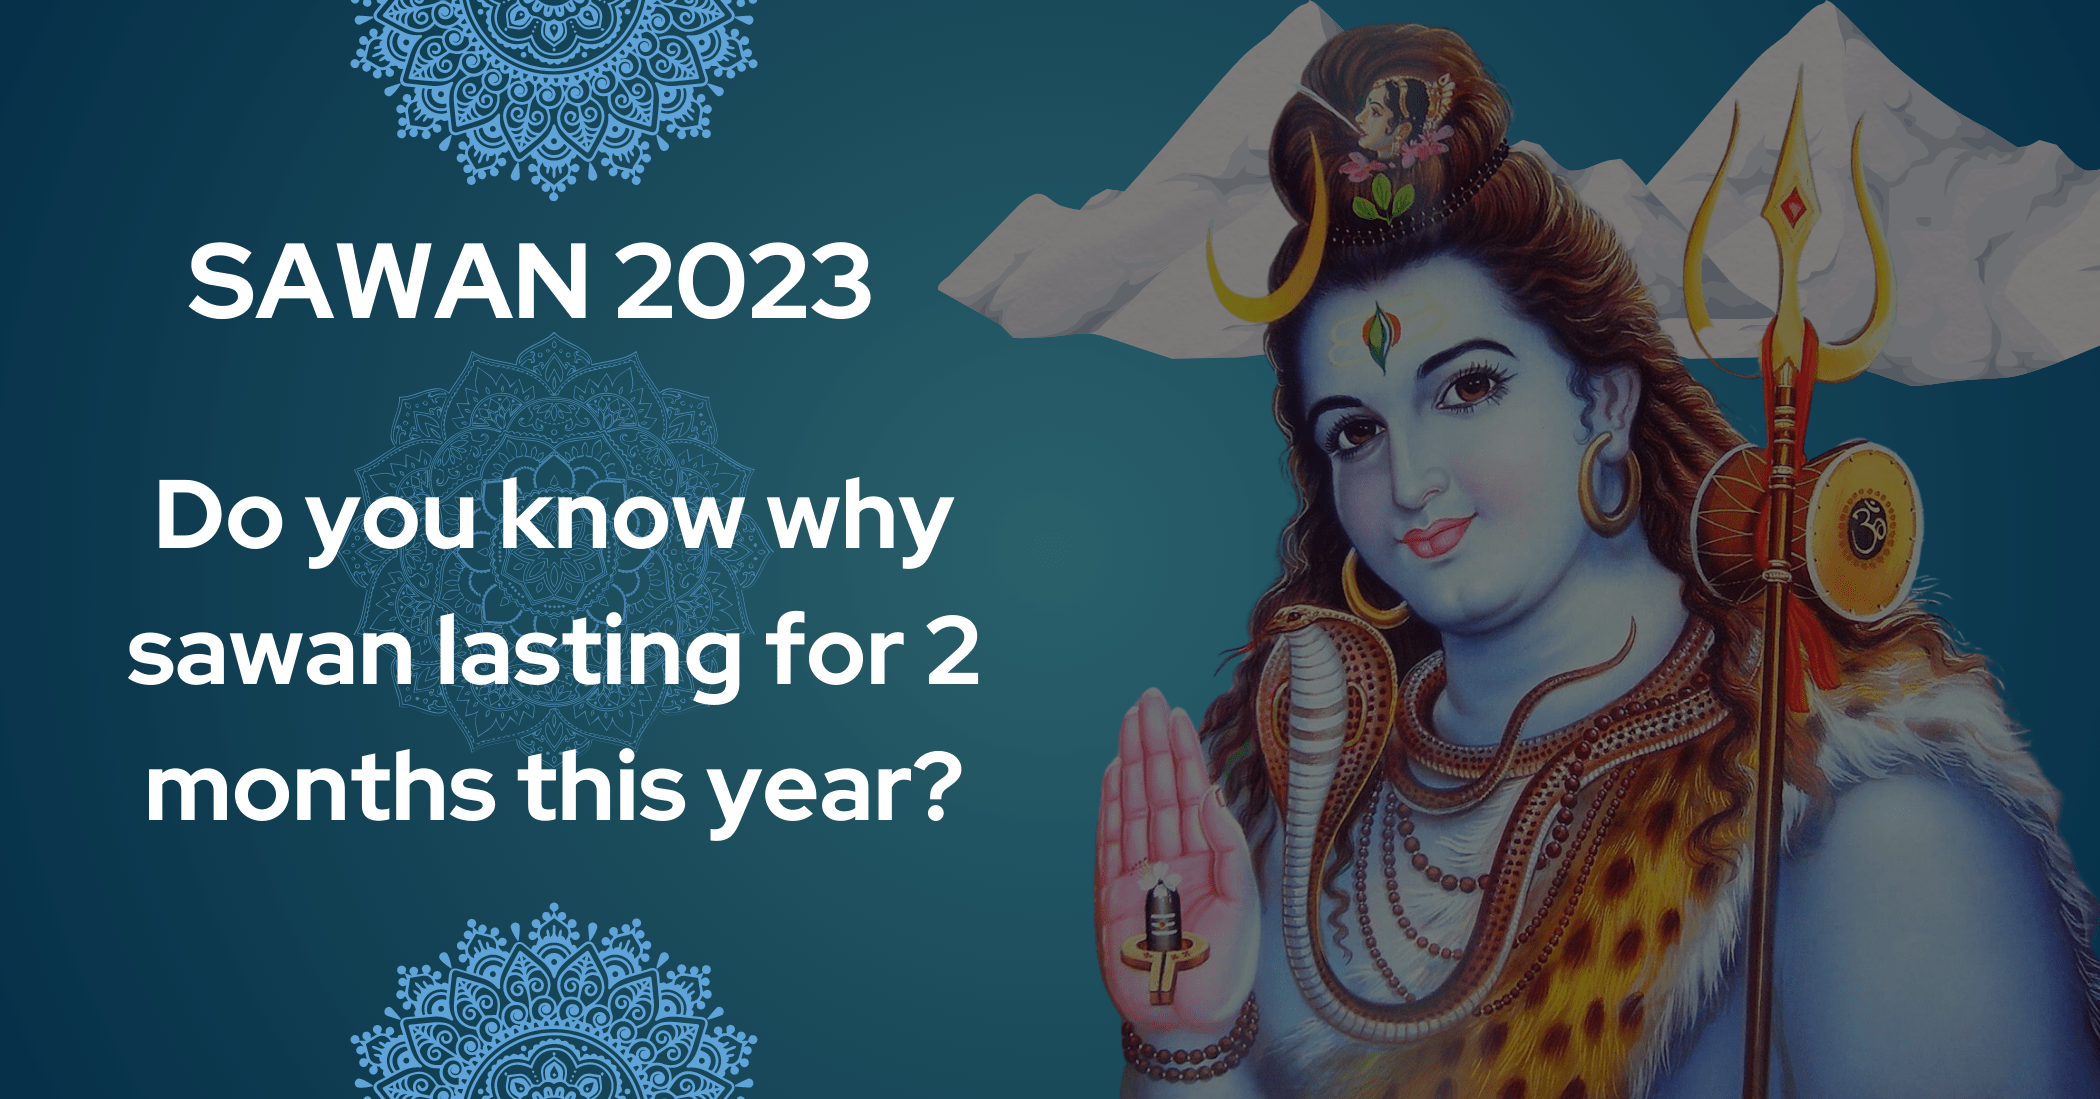 Sawan/Shravana 2023: Amazing Coincidence After 19 Years - Sawan for 2 Months